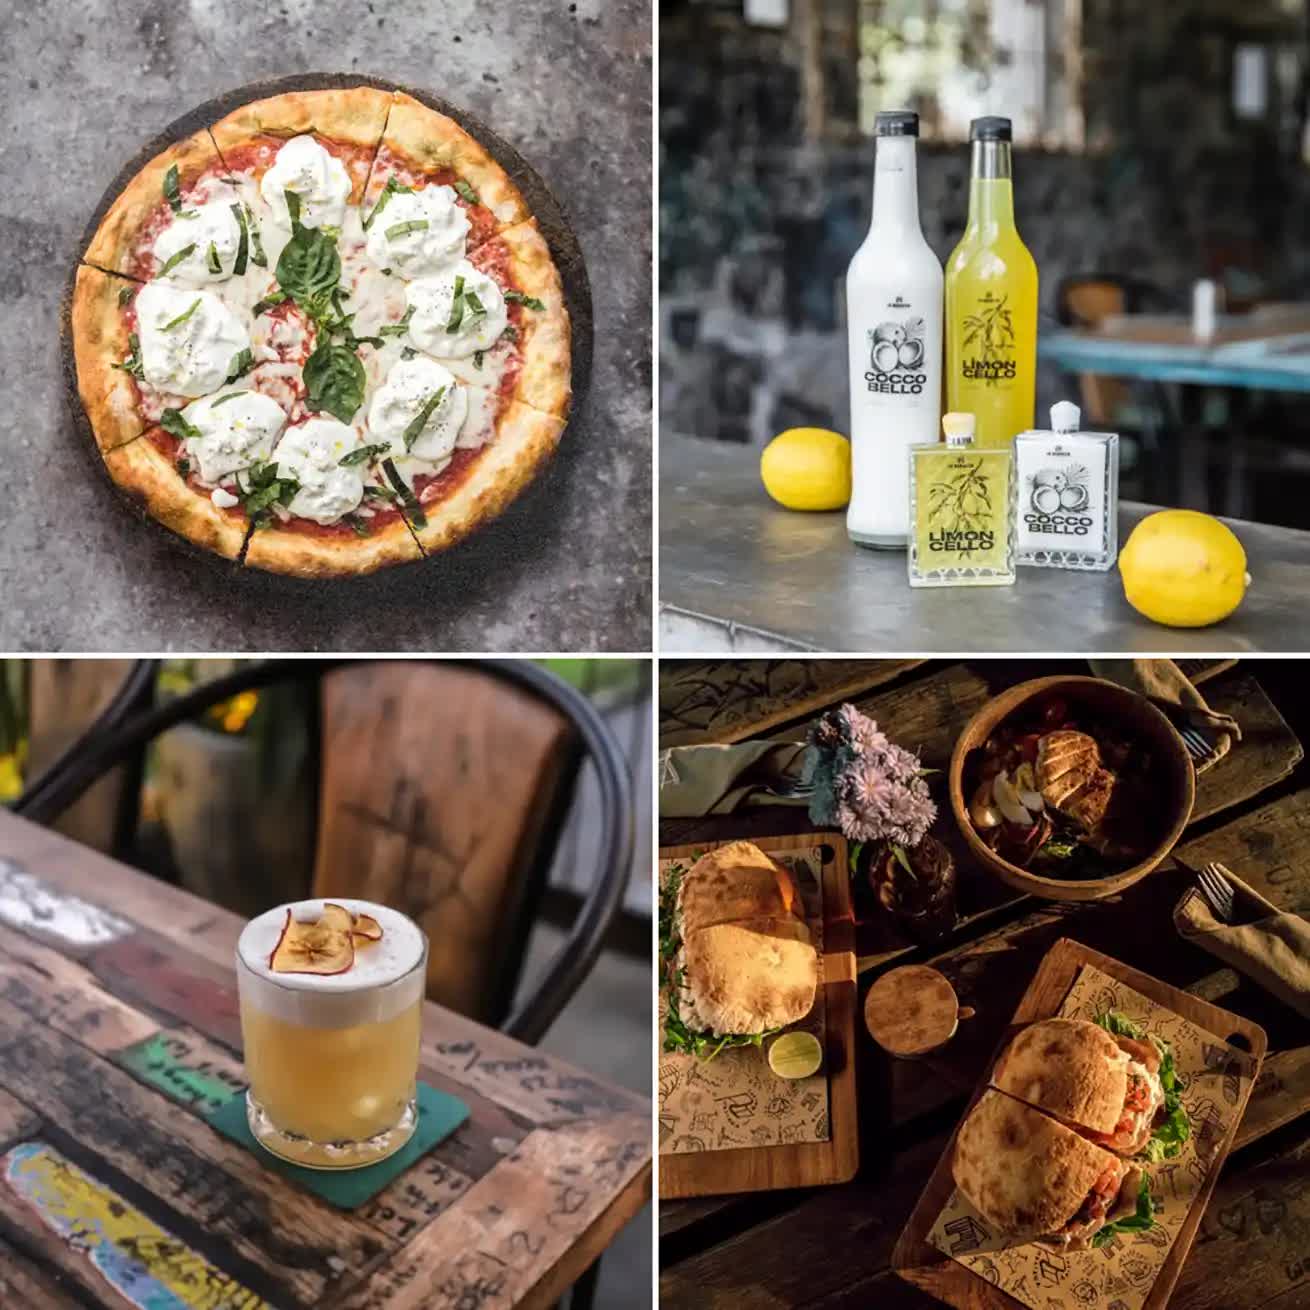 Pizza, limoncello, coccobello and other traditional Italian drinks and dishes at La Baracca